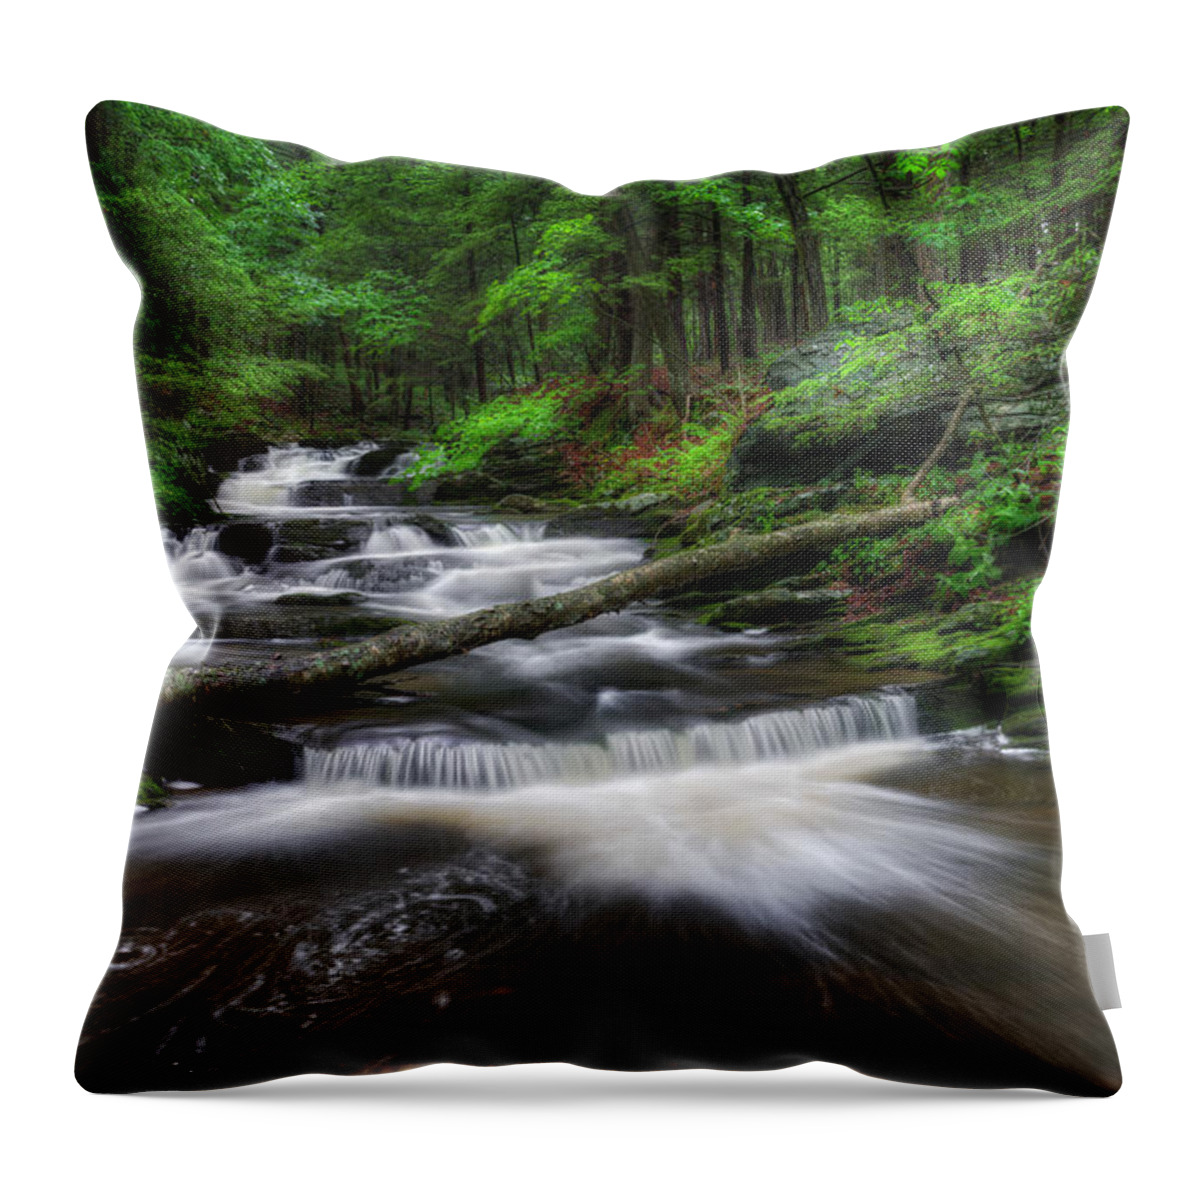 Green Throw Pillow featuring the photograph Cool Spring Stream by Bill Wakeley